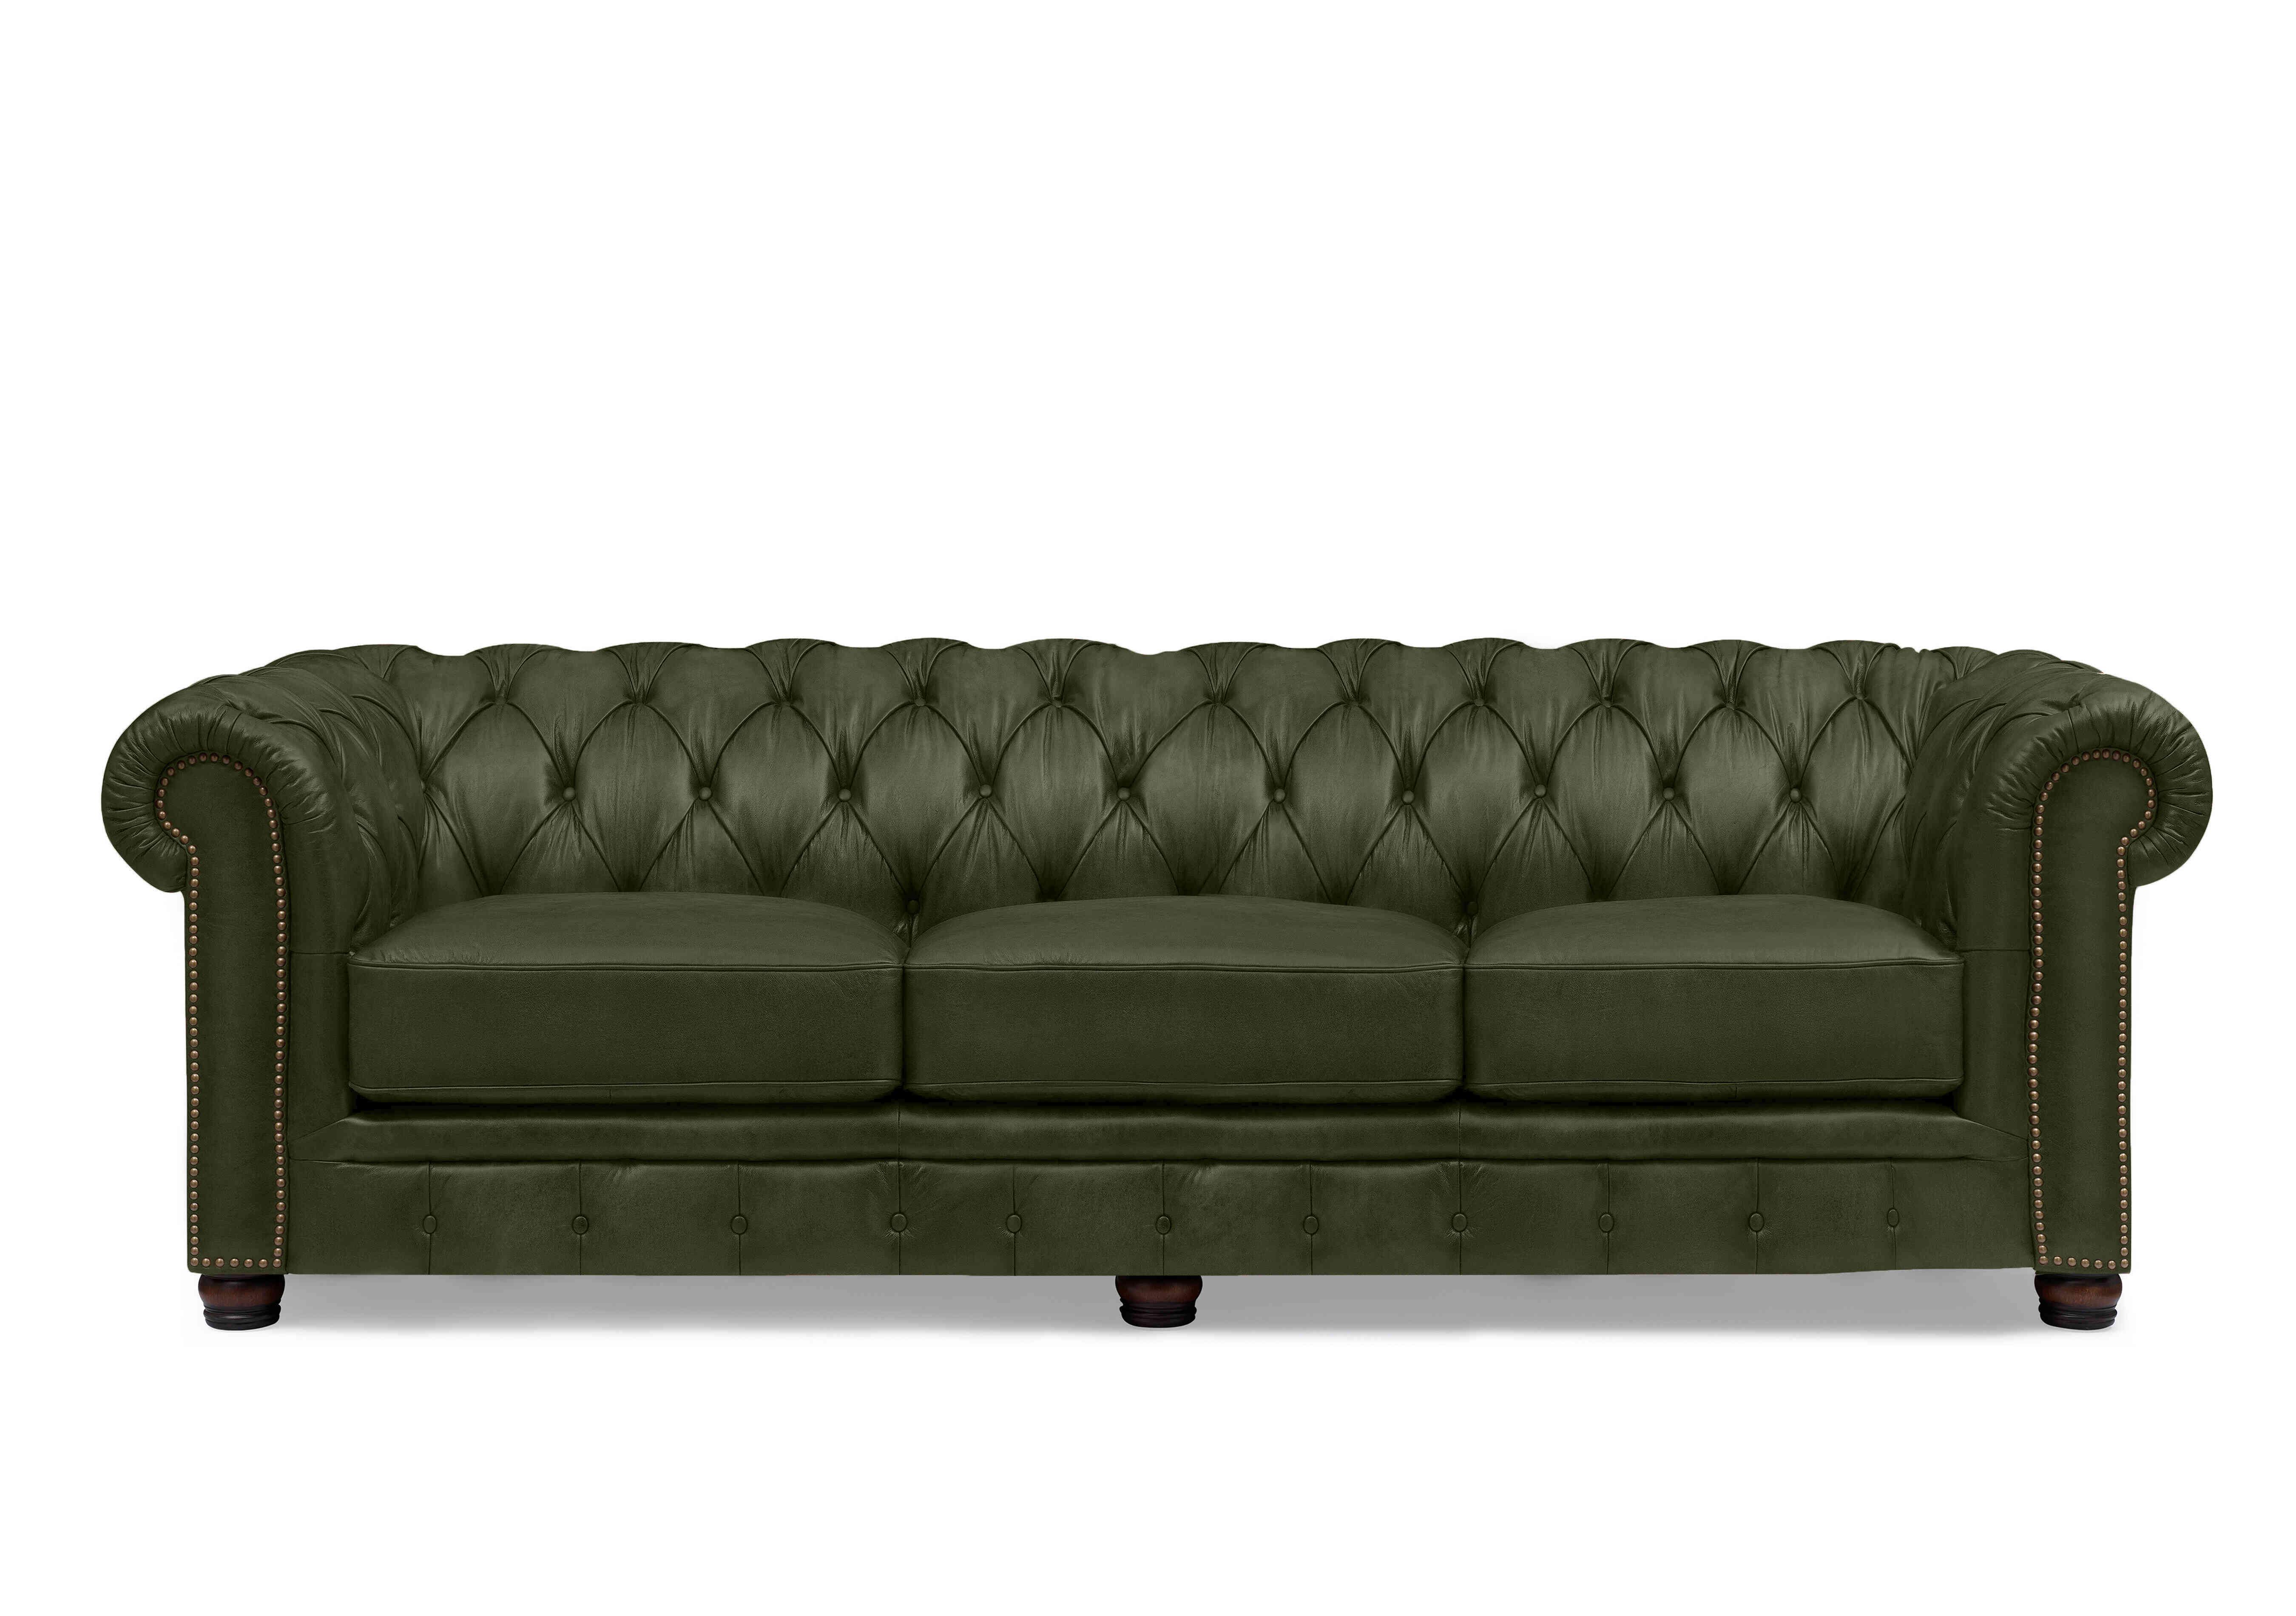 Shackleton 4 Seater Leather Chesterfield Sofa in X3y1-1965ls Emerald on Furniture Village